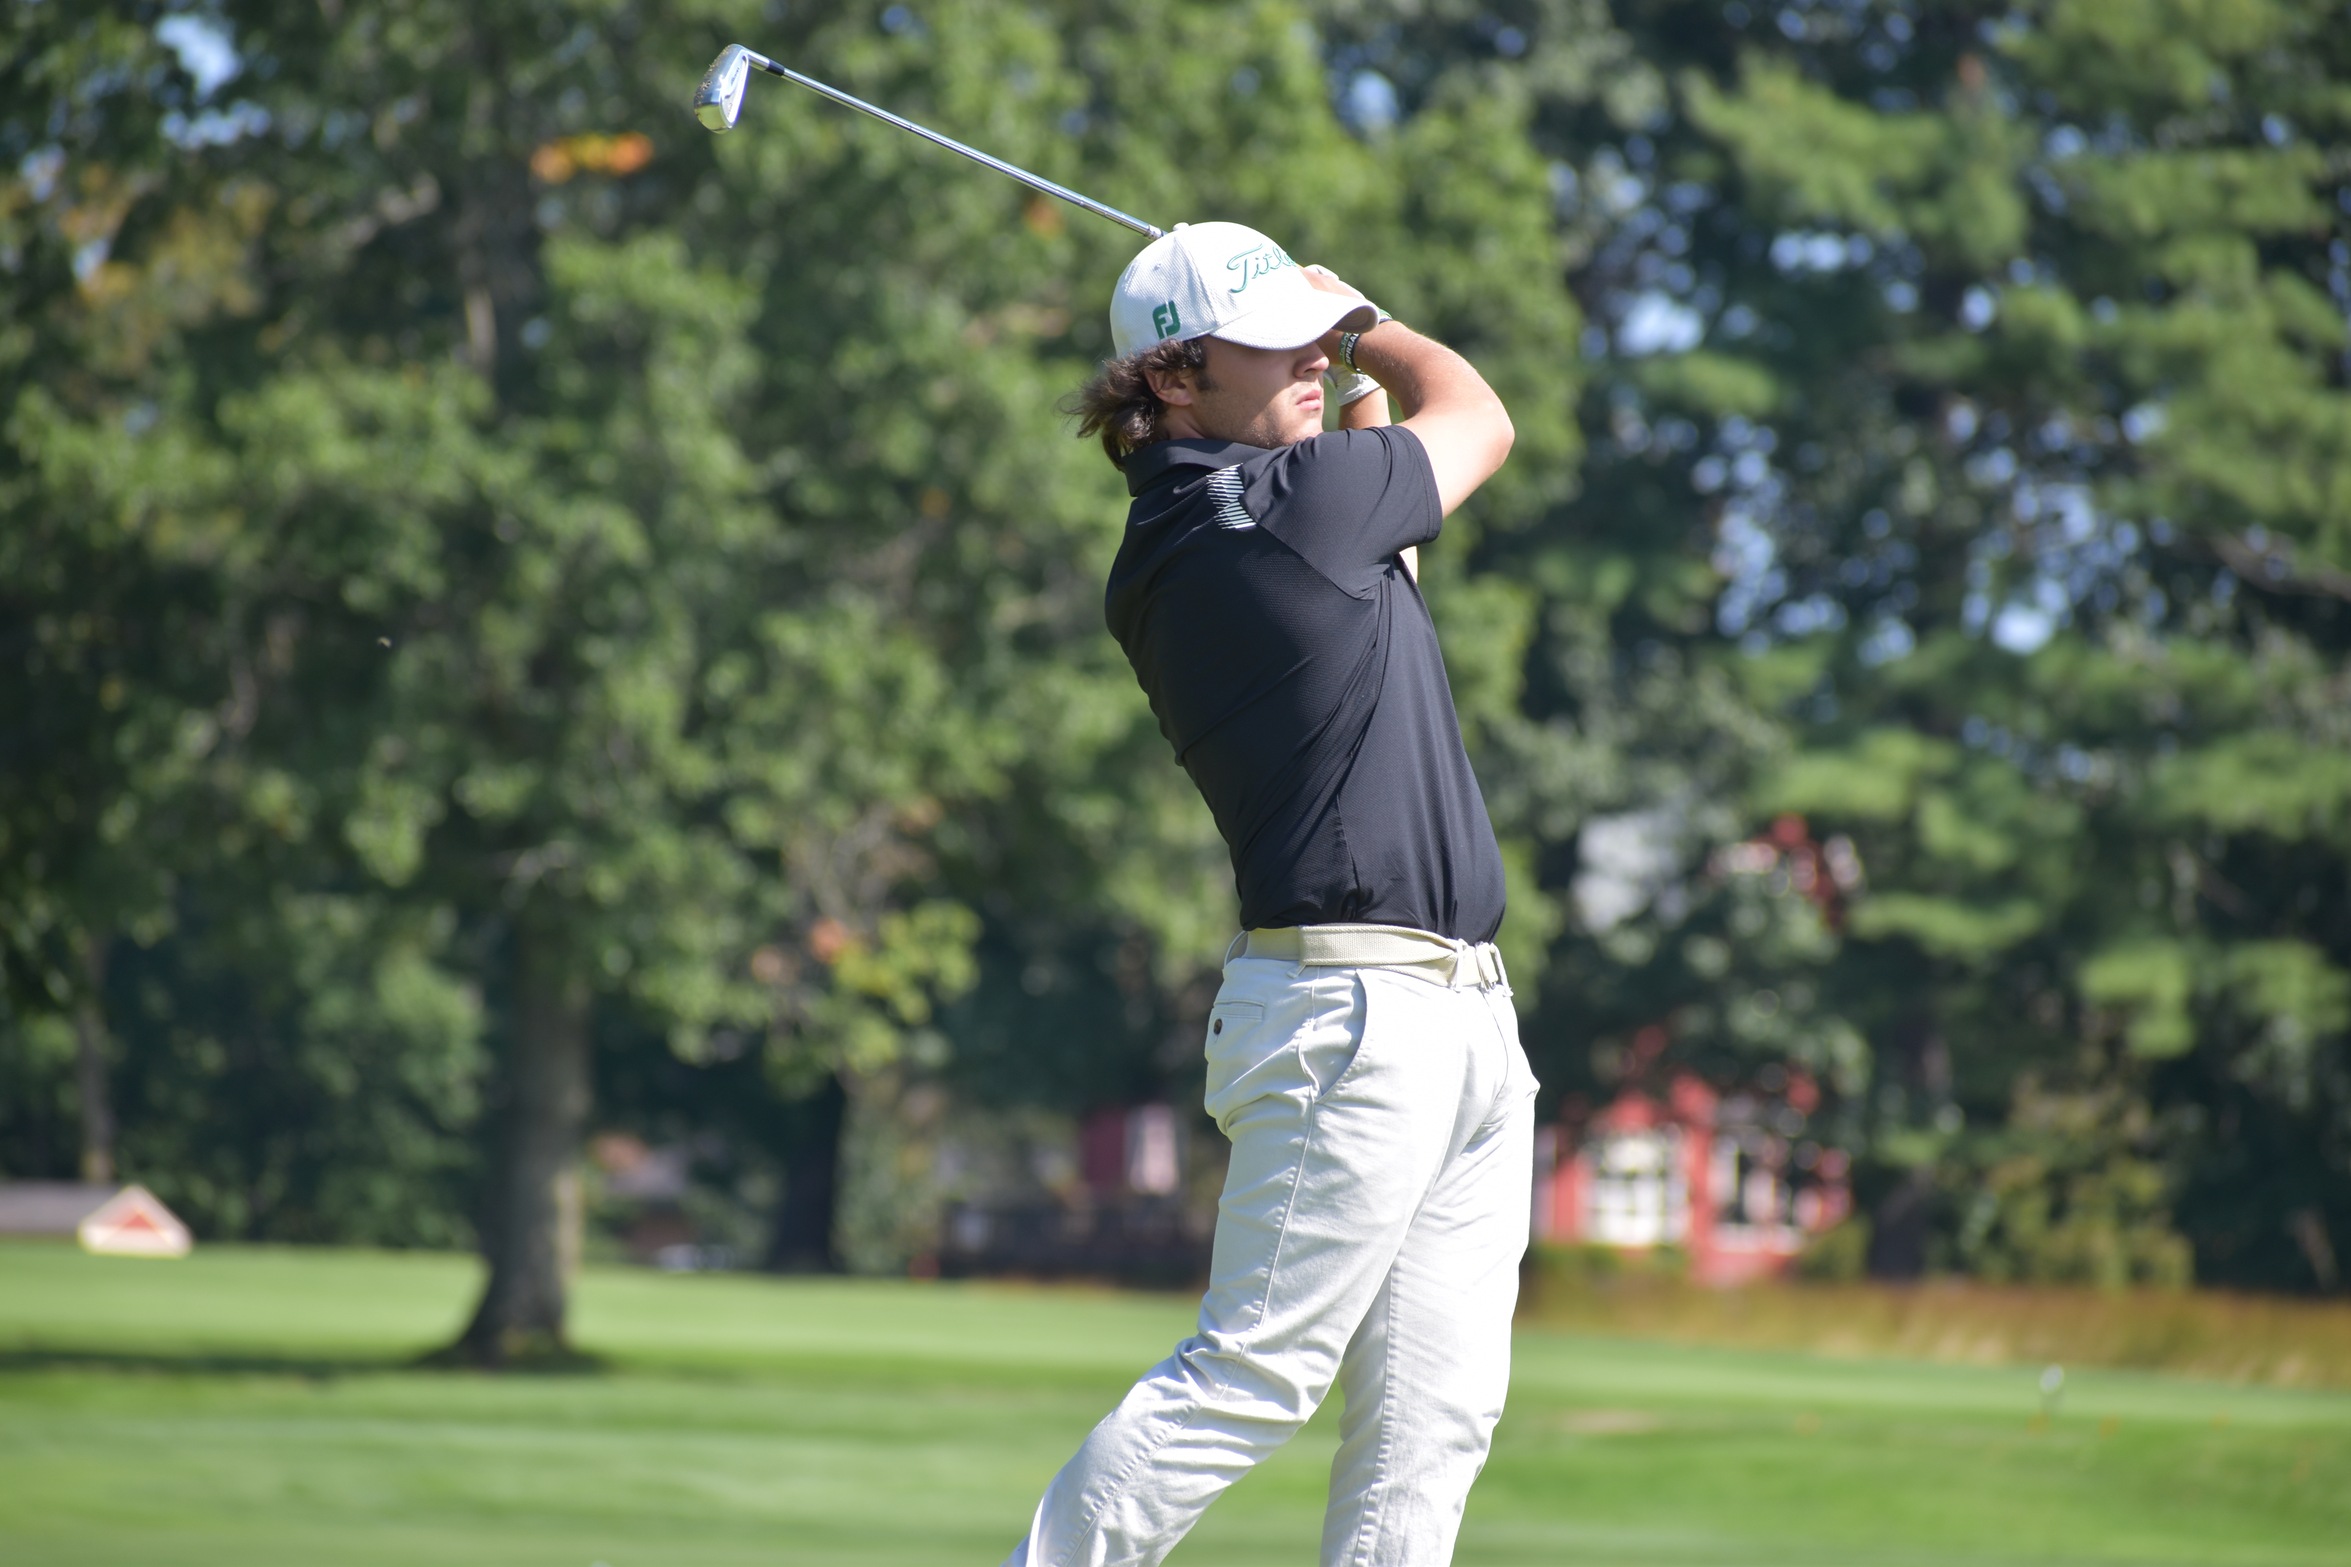 Elms Men's Golf Ties for 18th at New England Championship